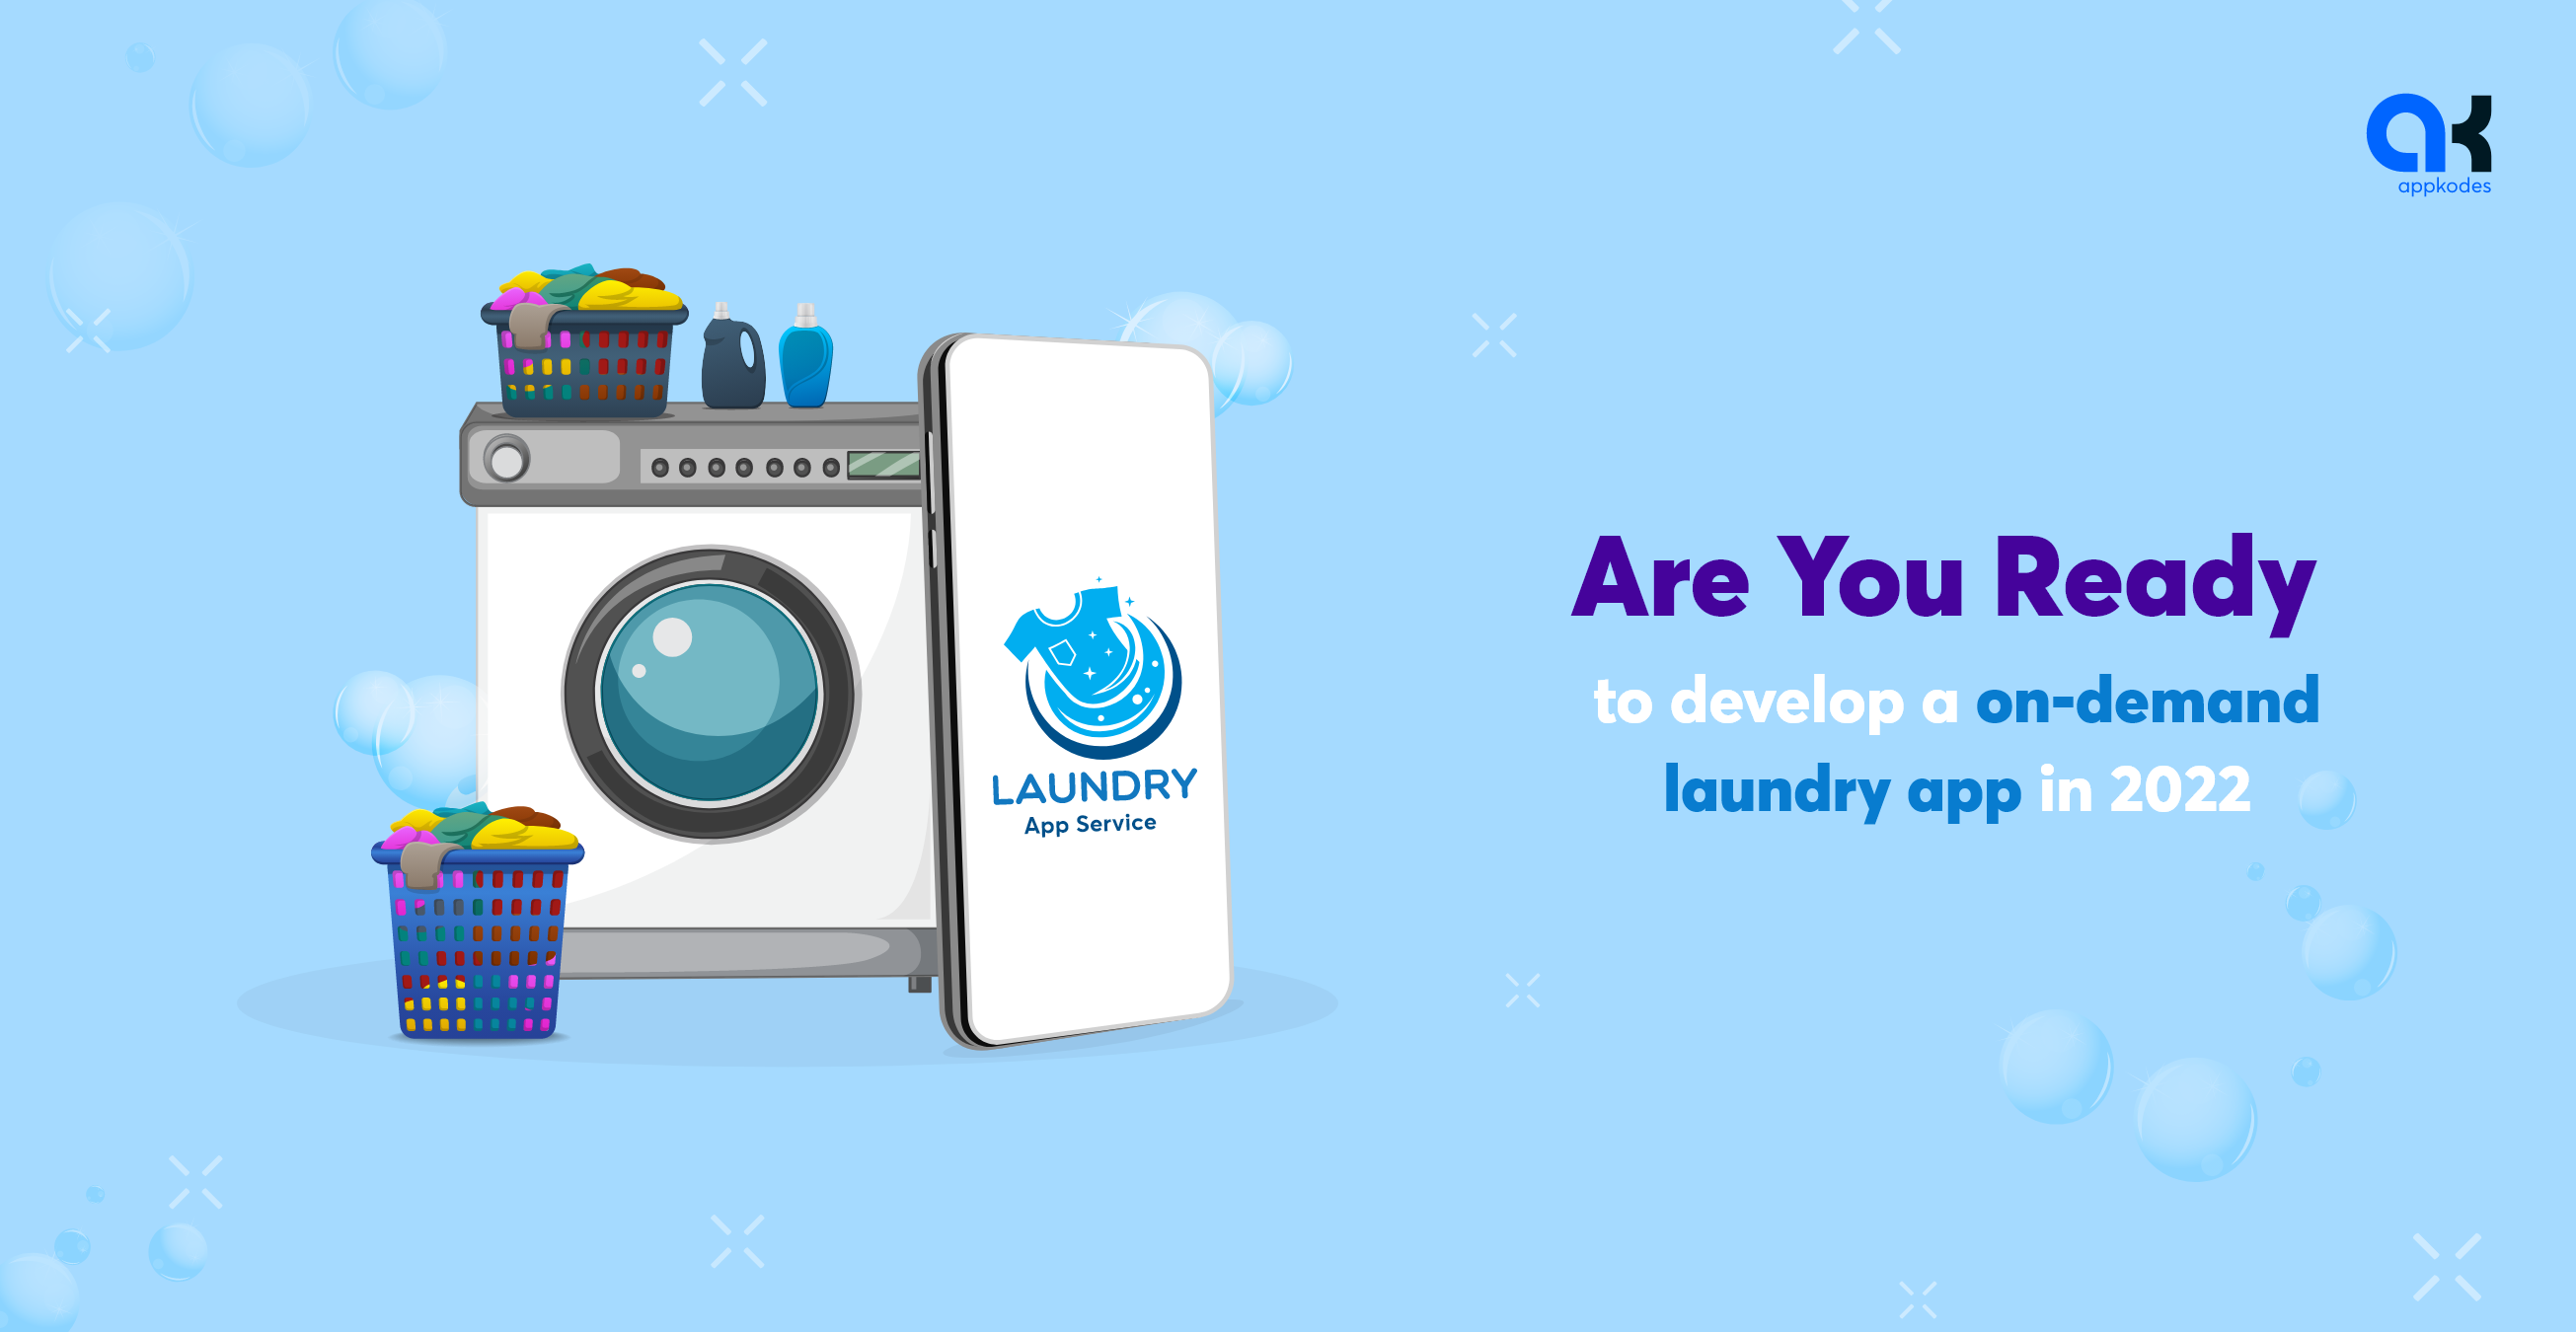 Are You Ready to develop a on-demand laundry app in 2022